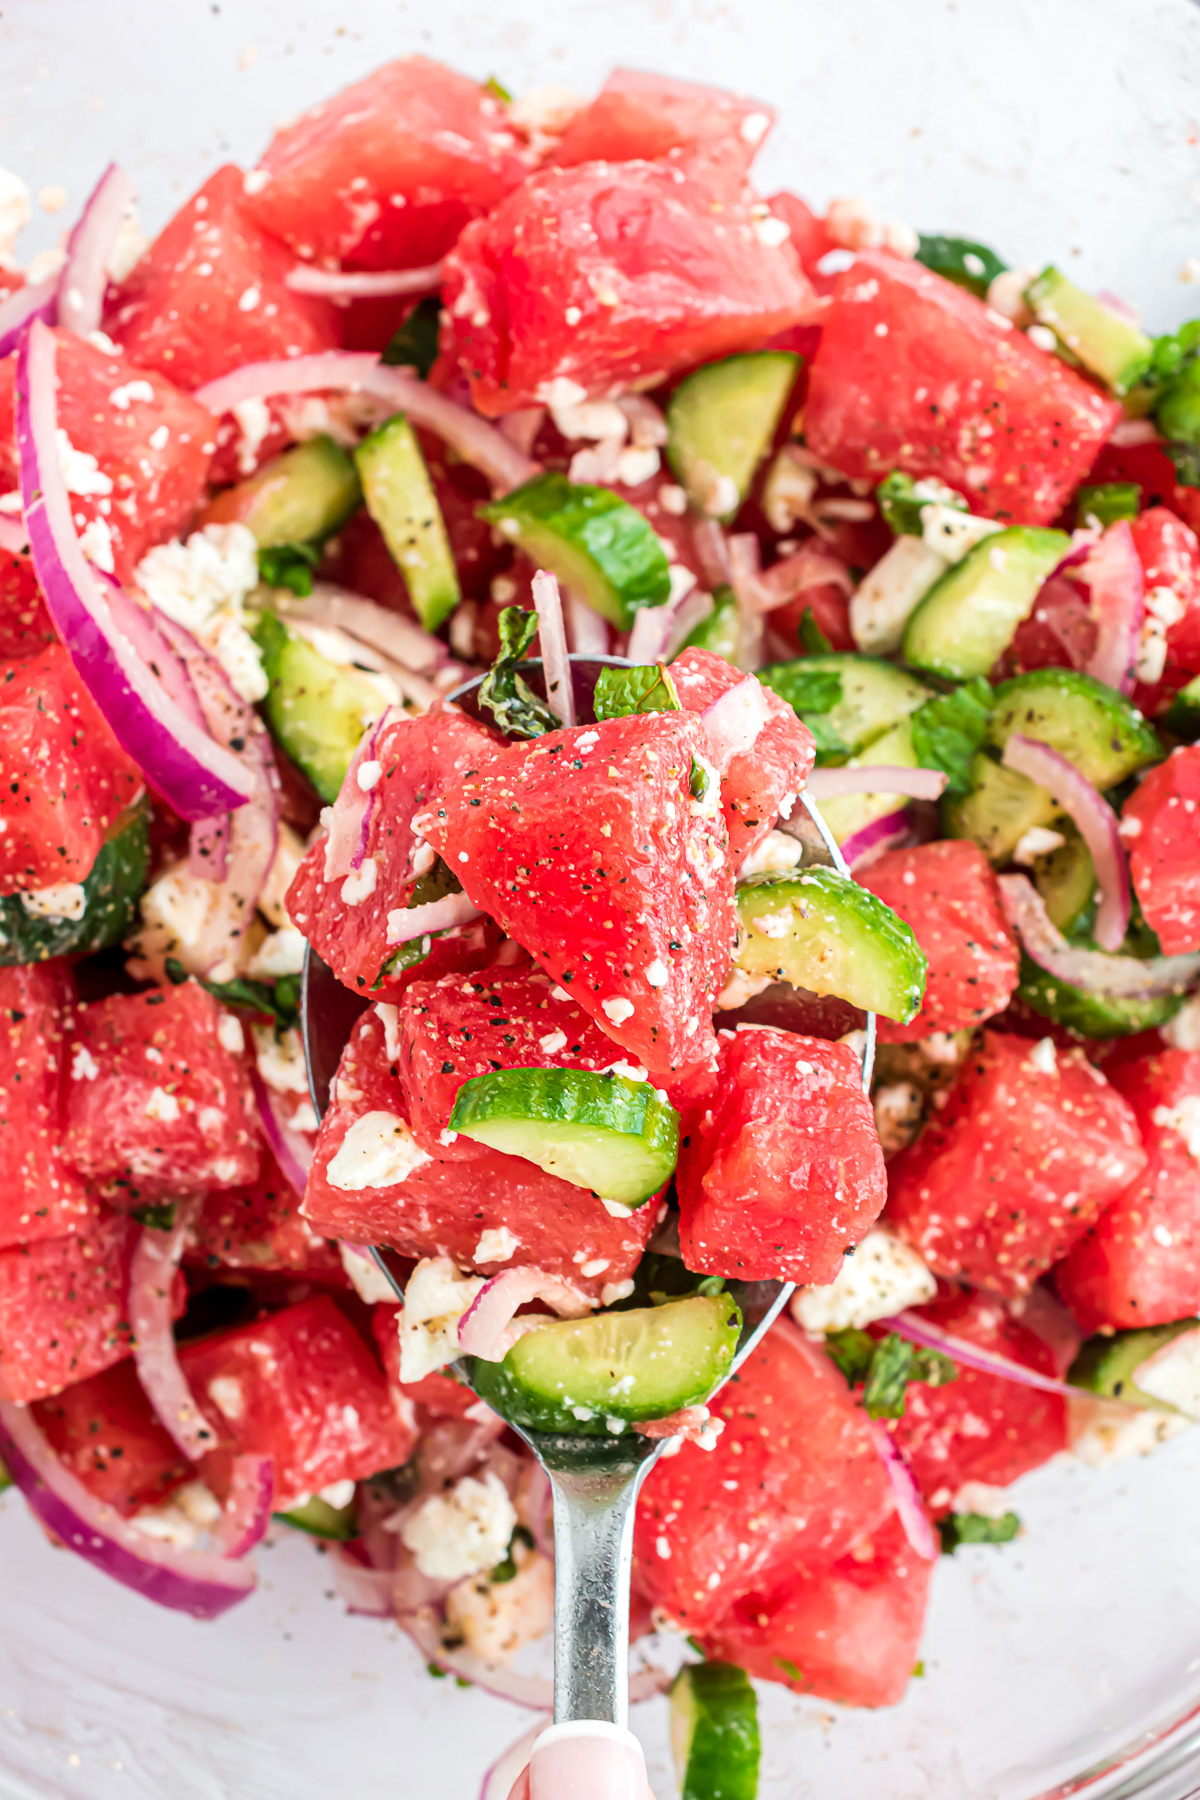 A spoonful of watermelon salad showing large chunks of juicy watermelon, cucumber slices, red onion and crumbled goat cheese.